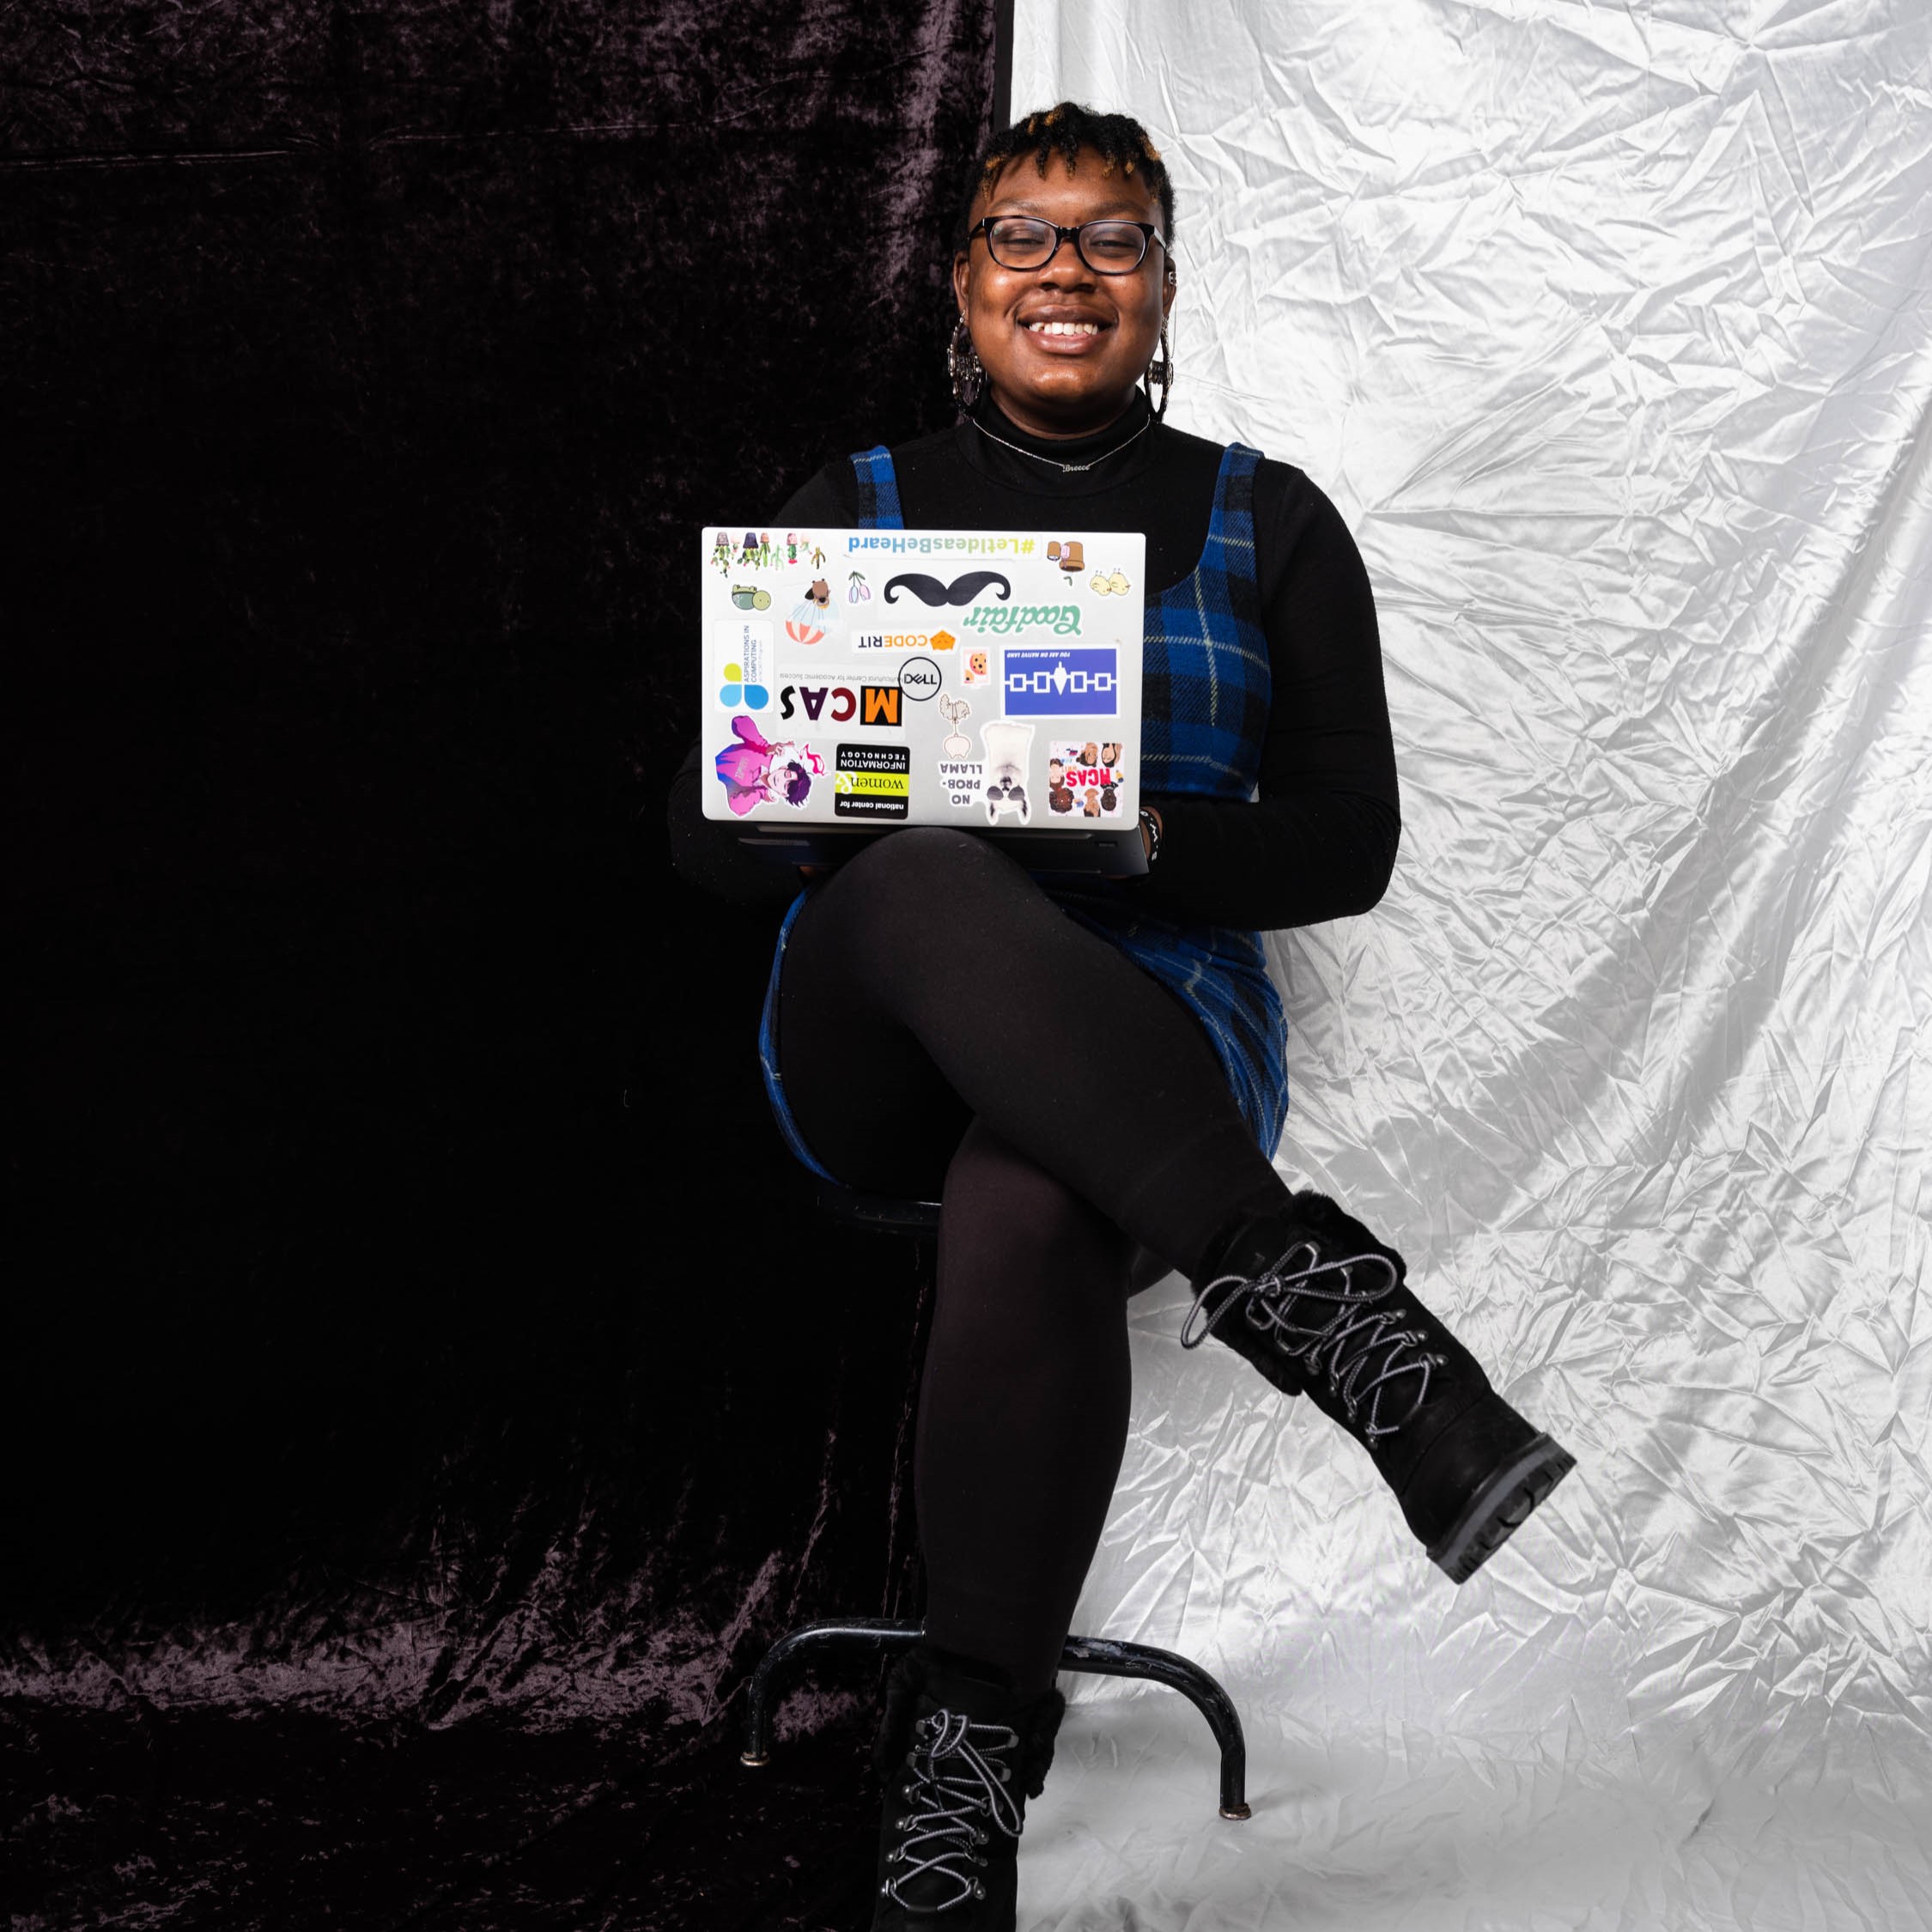 An image of me, Jabrecia, seated in a chair wearing a blue and black dress, black leggings, and black boots. There is a silver laptop on my lap covered in stickers.